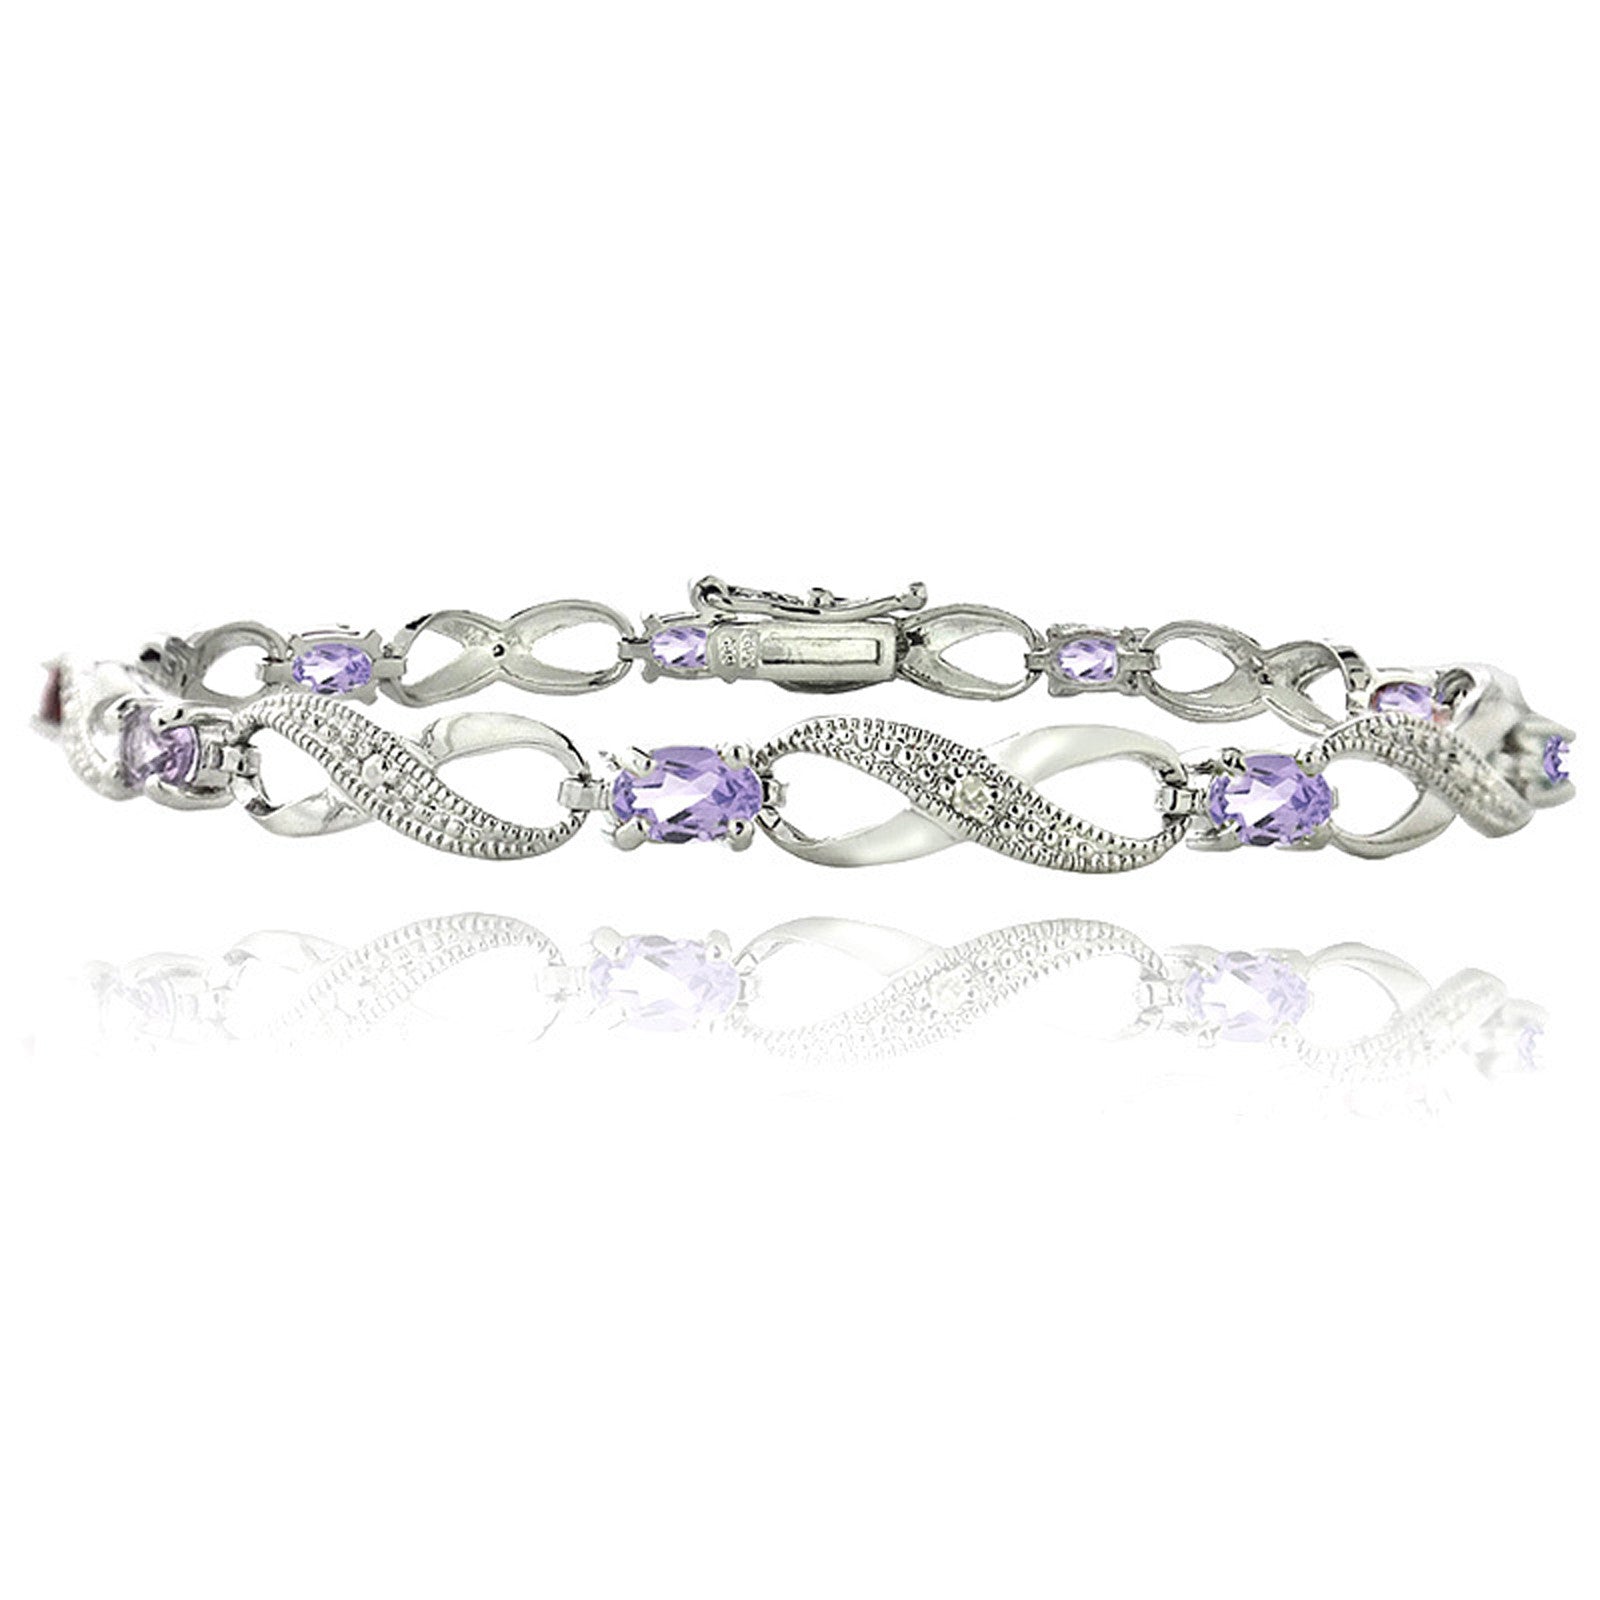 Infinity Bracelet With Diamond & Gem Accents in a Linked Style - Amethyst